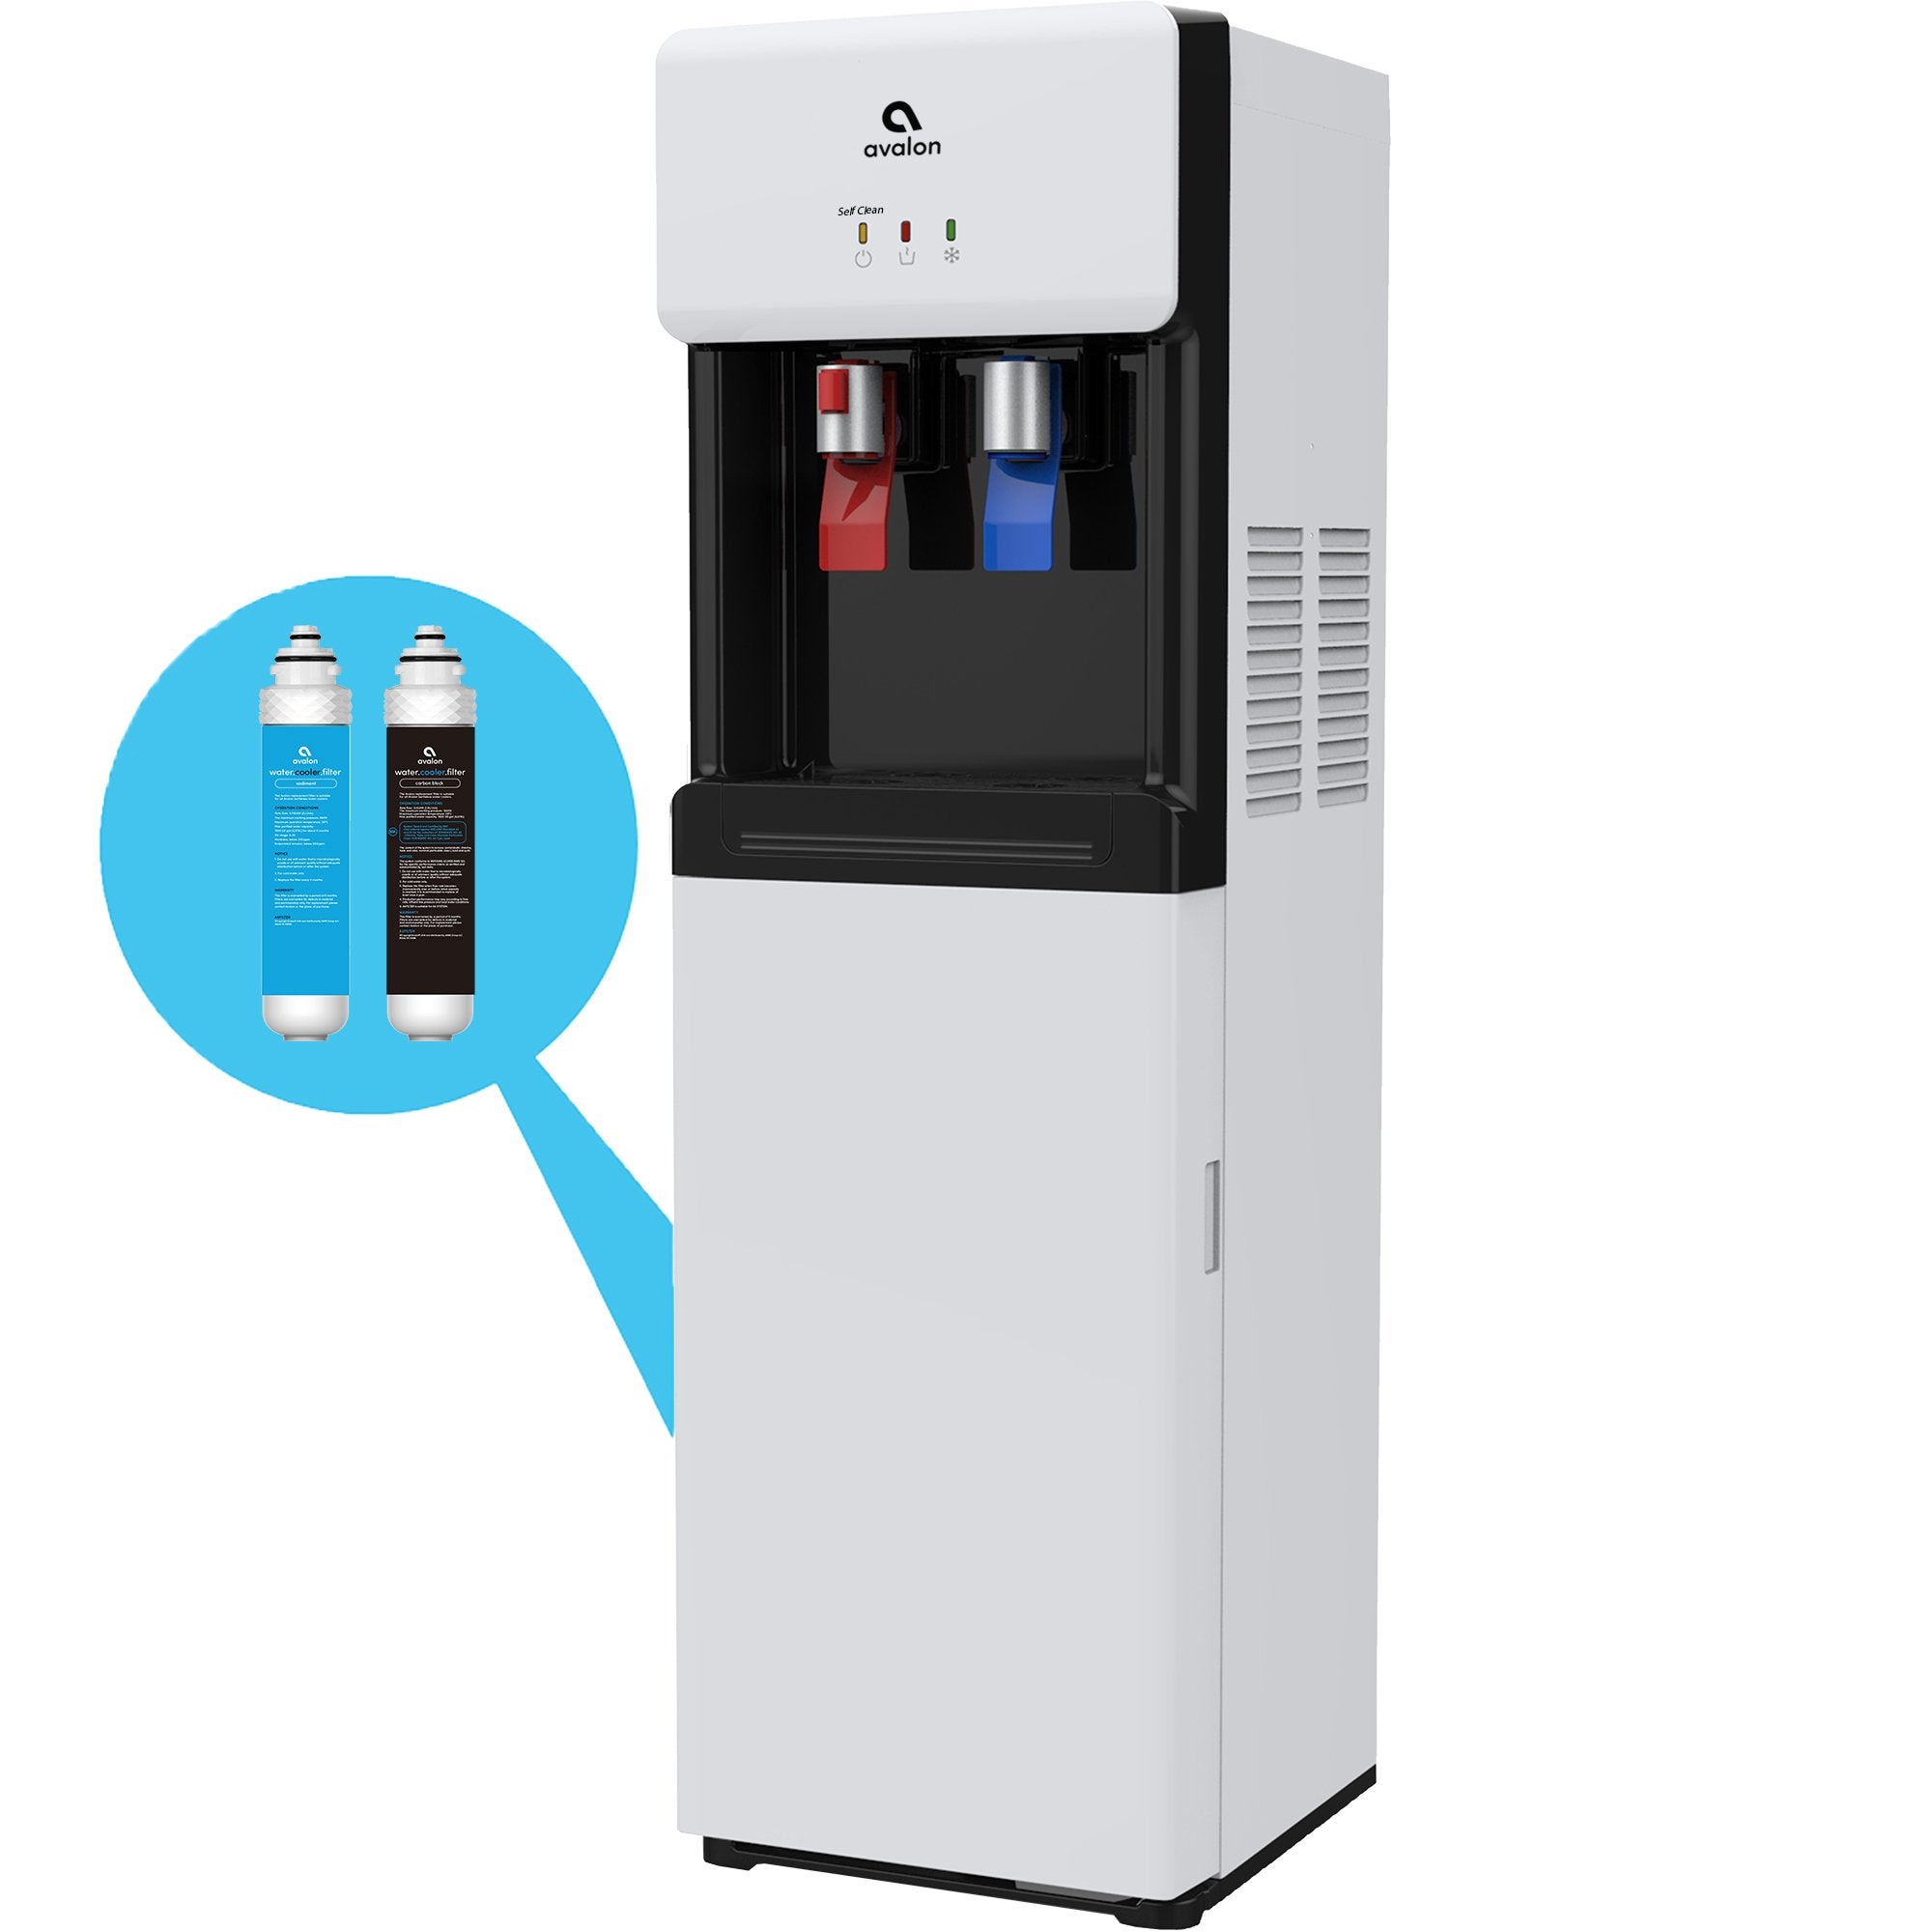 Avalon Self Cleaning Bottleless Water Cooler Dispenser - Hot & Cold Water with Child Safety Lock